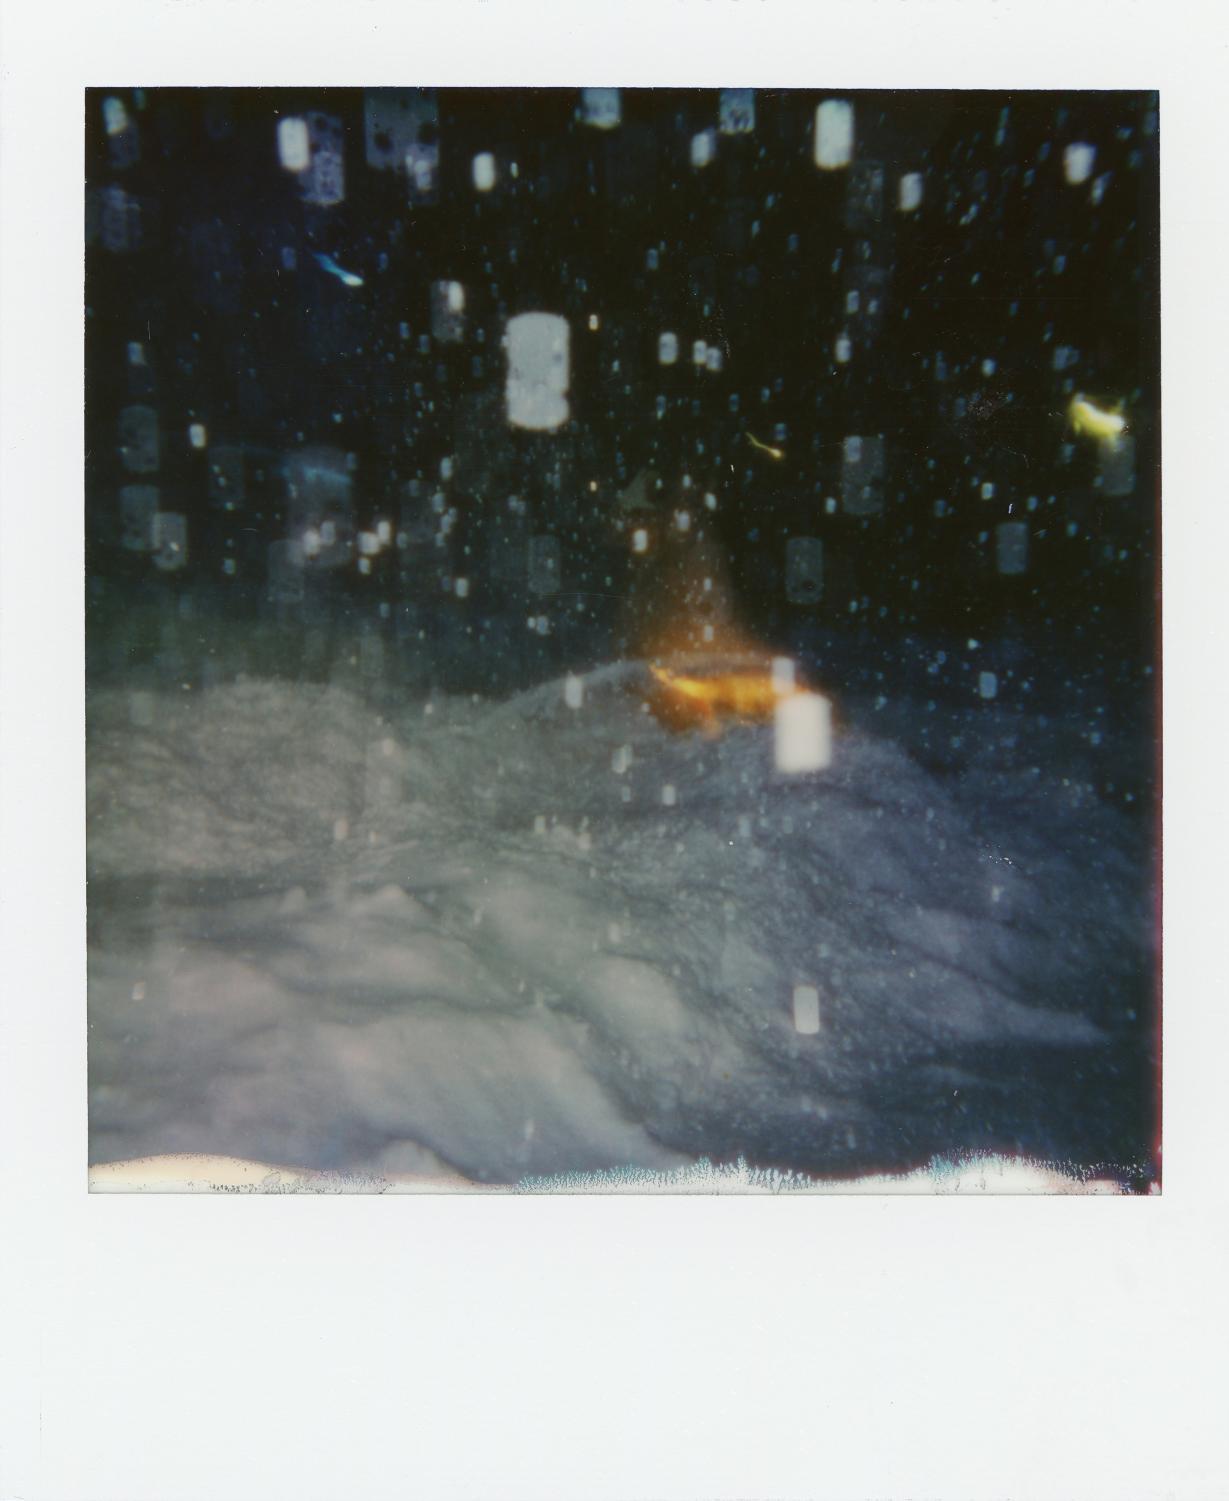 Lens%3A+Blizzard+blasts+Massachusetts%2C+Beacon+photographer+sets+out+to+capture+the+imagery